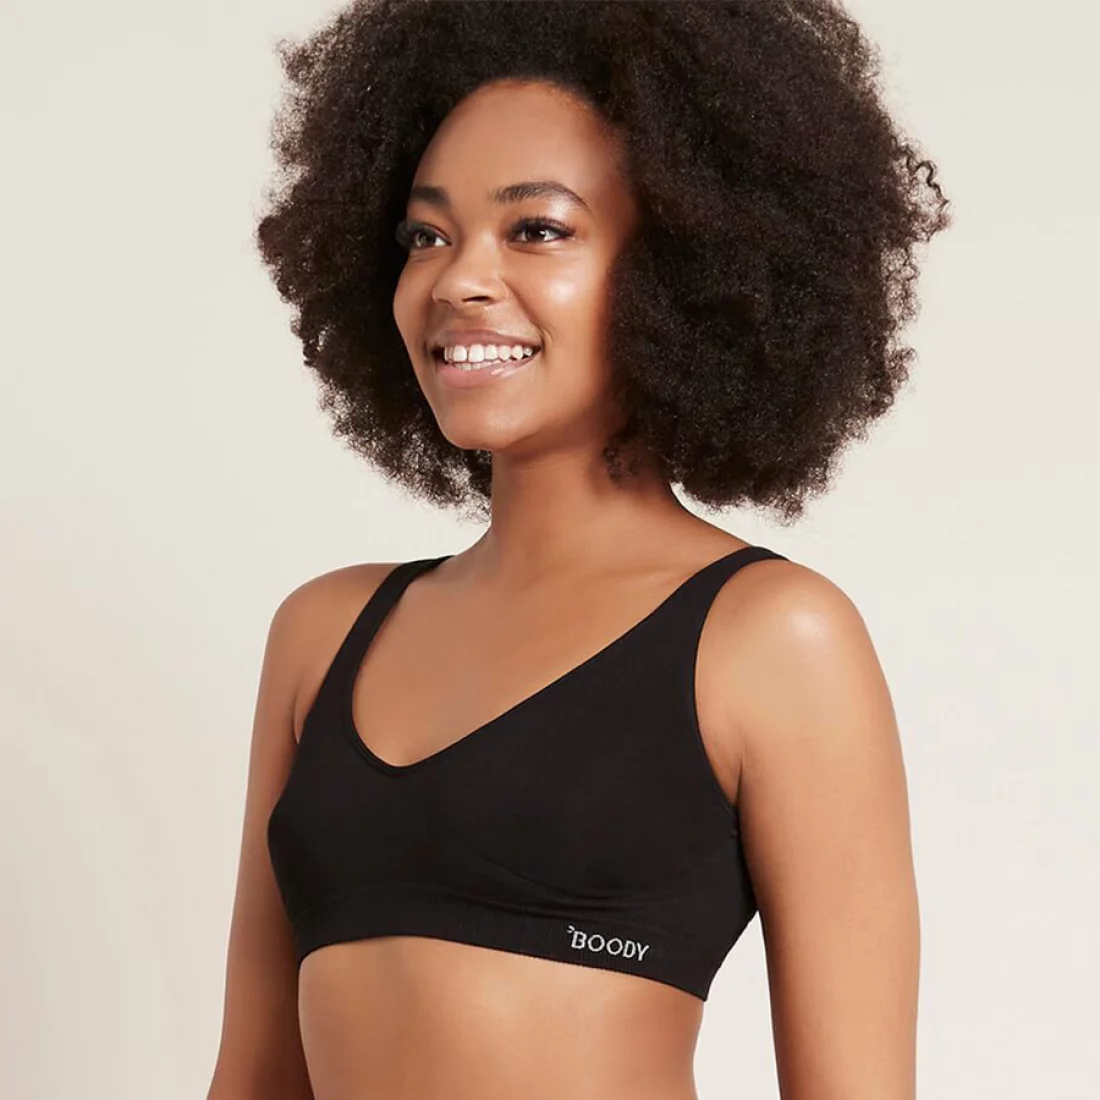 Boody Bamboo Shaper Bra - Black - Boody - Natural Collection